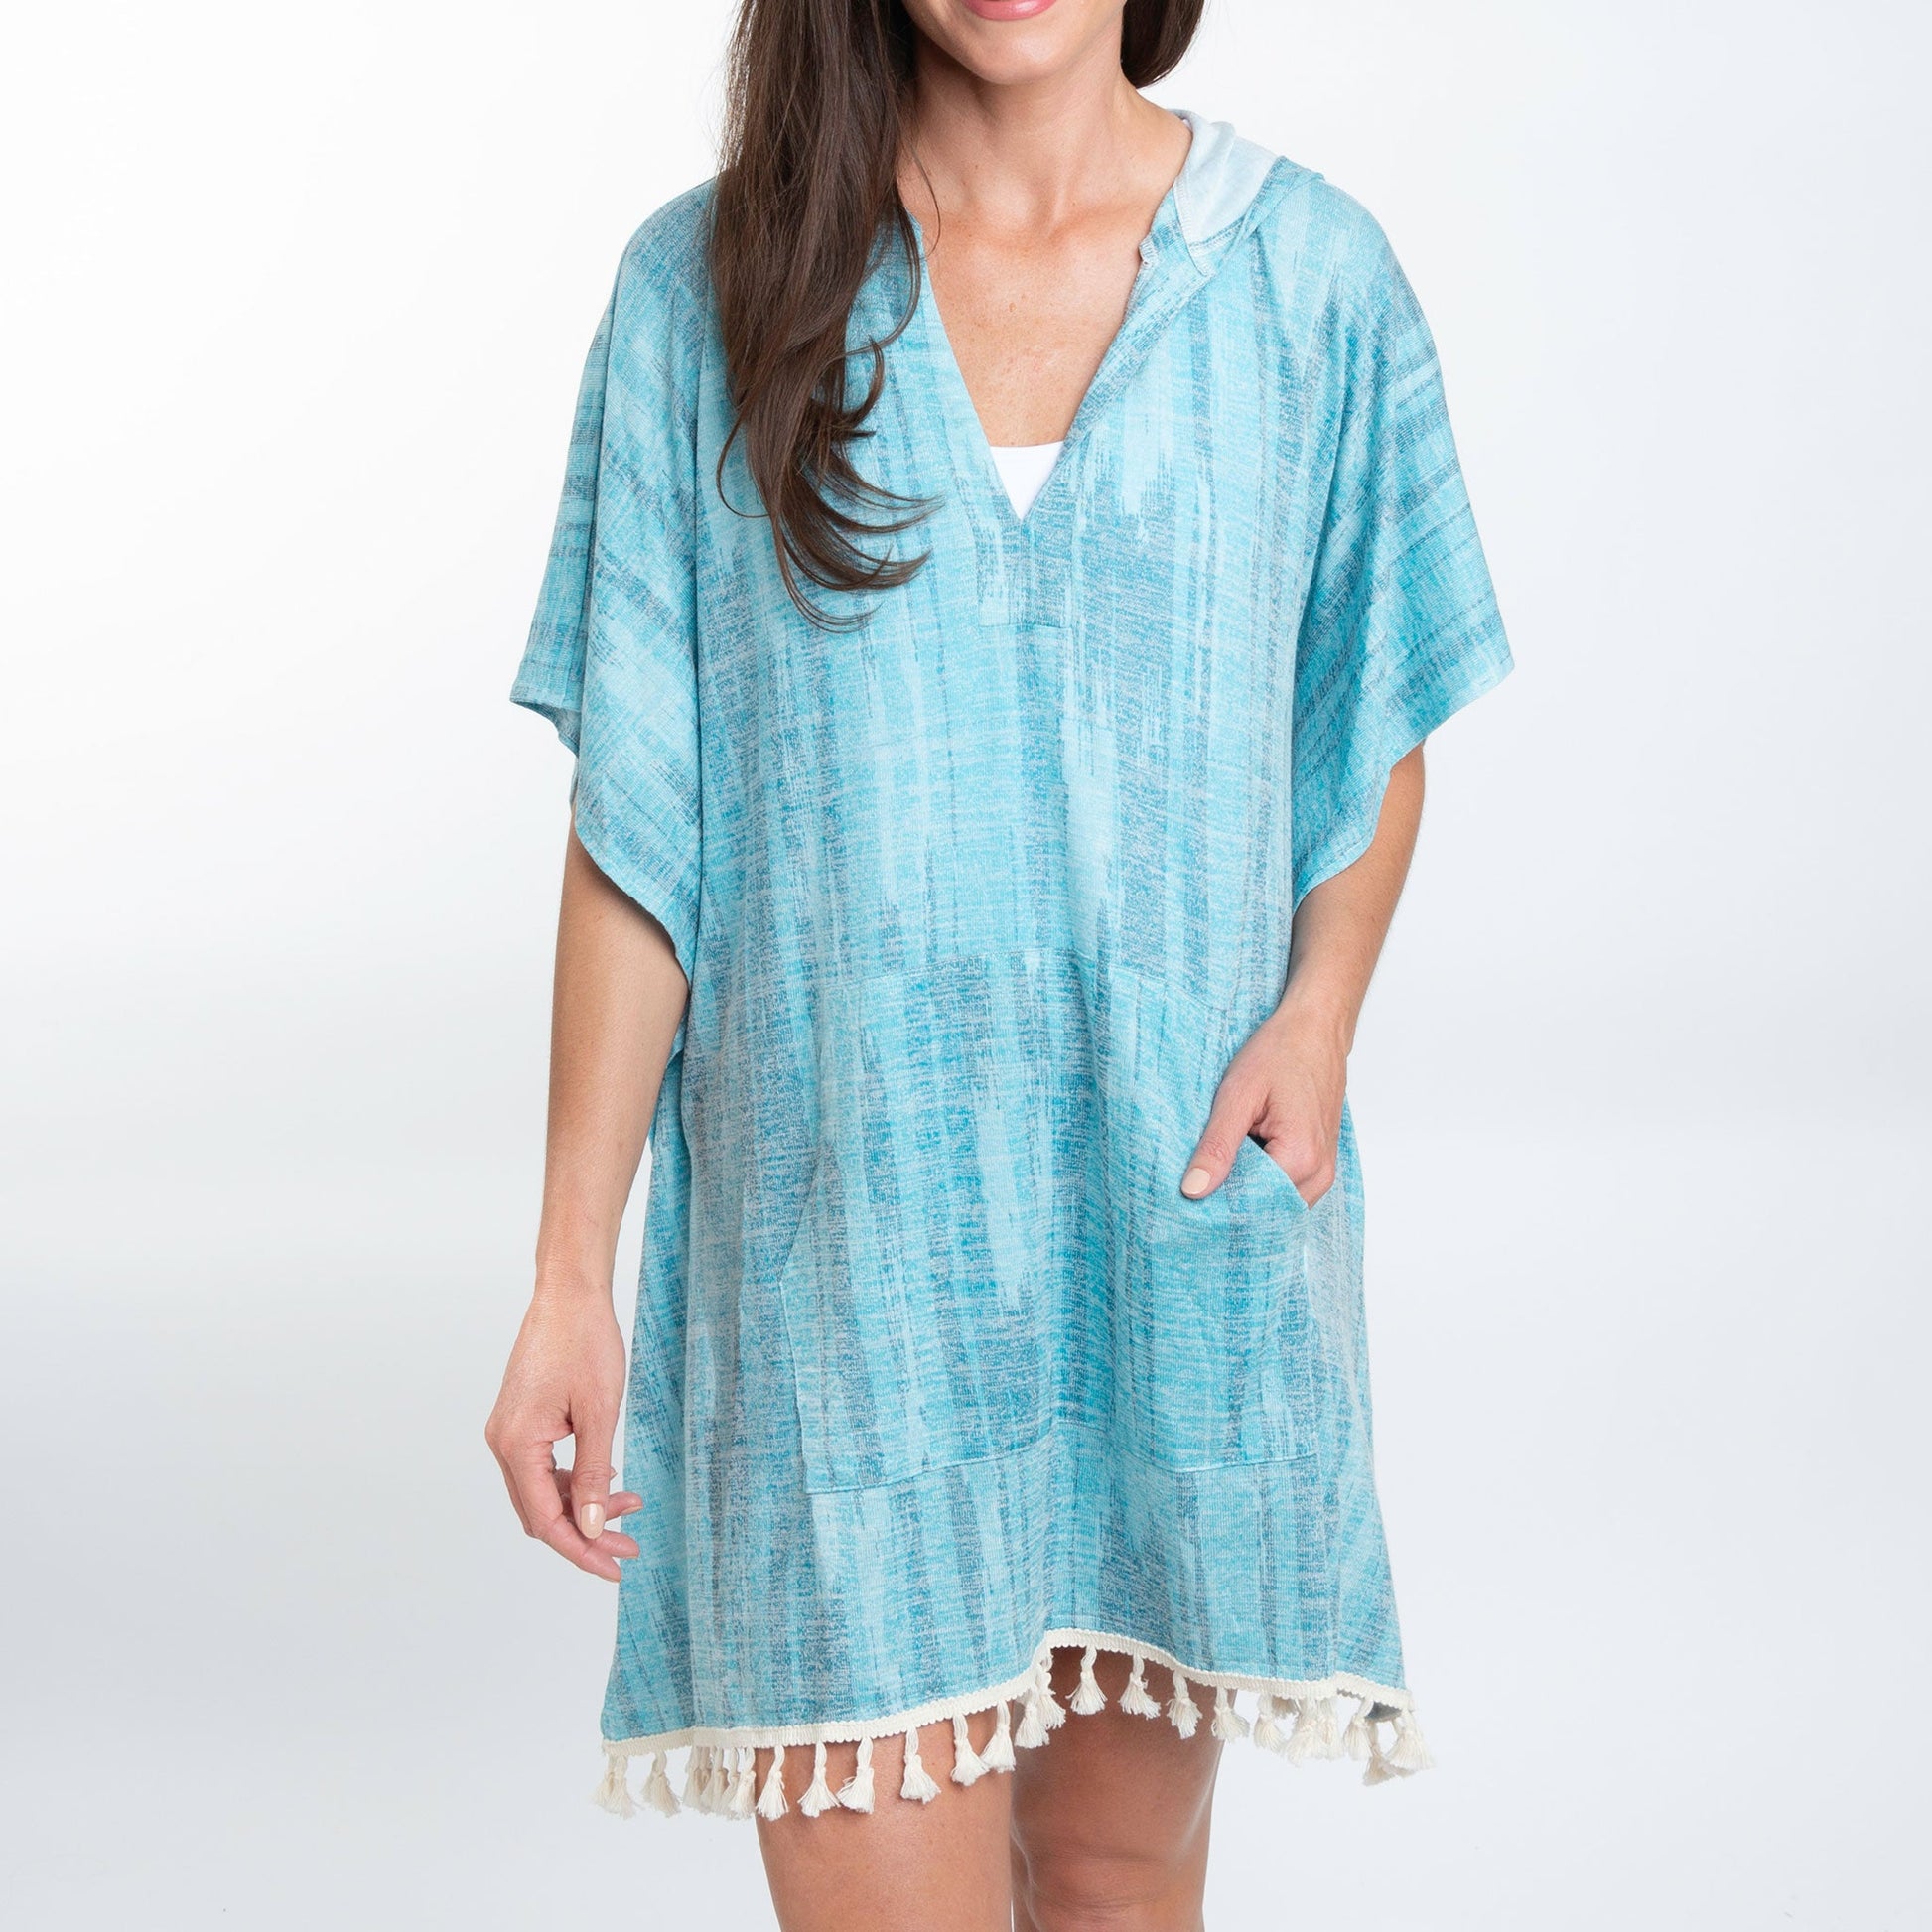 Naomi Hooded Poncho Cover Up